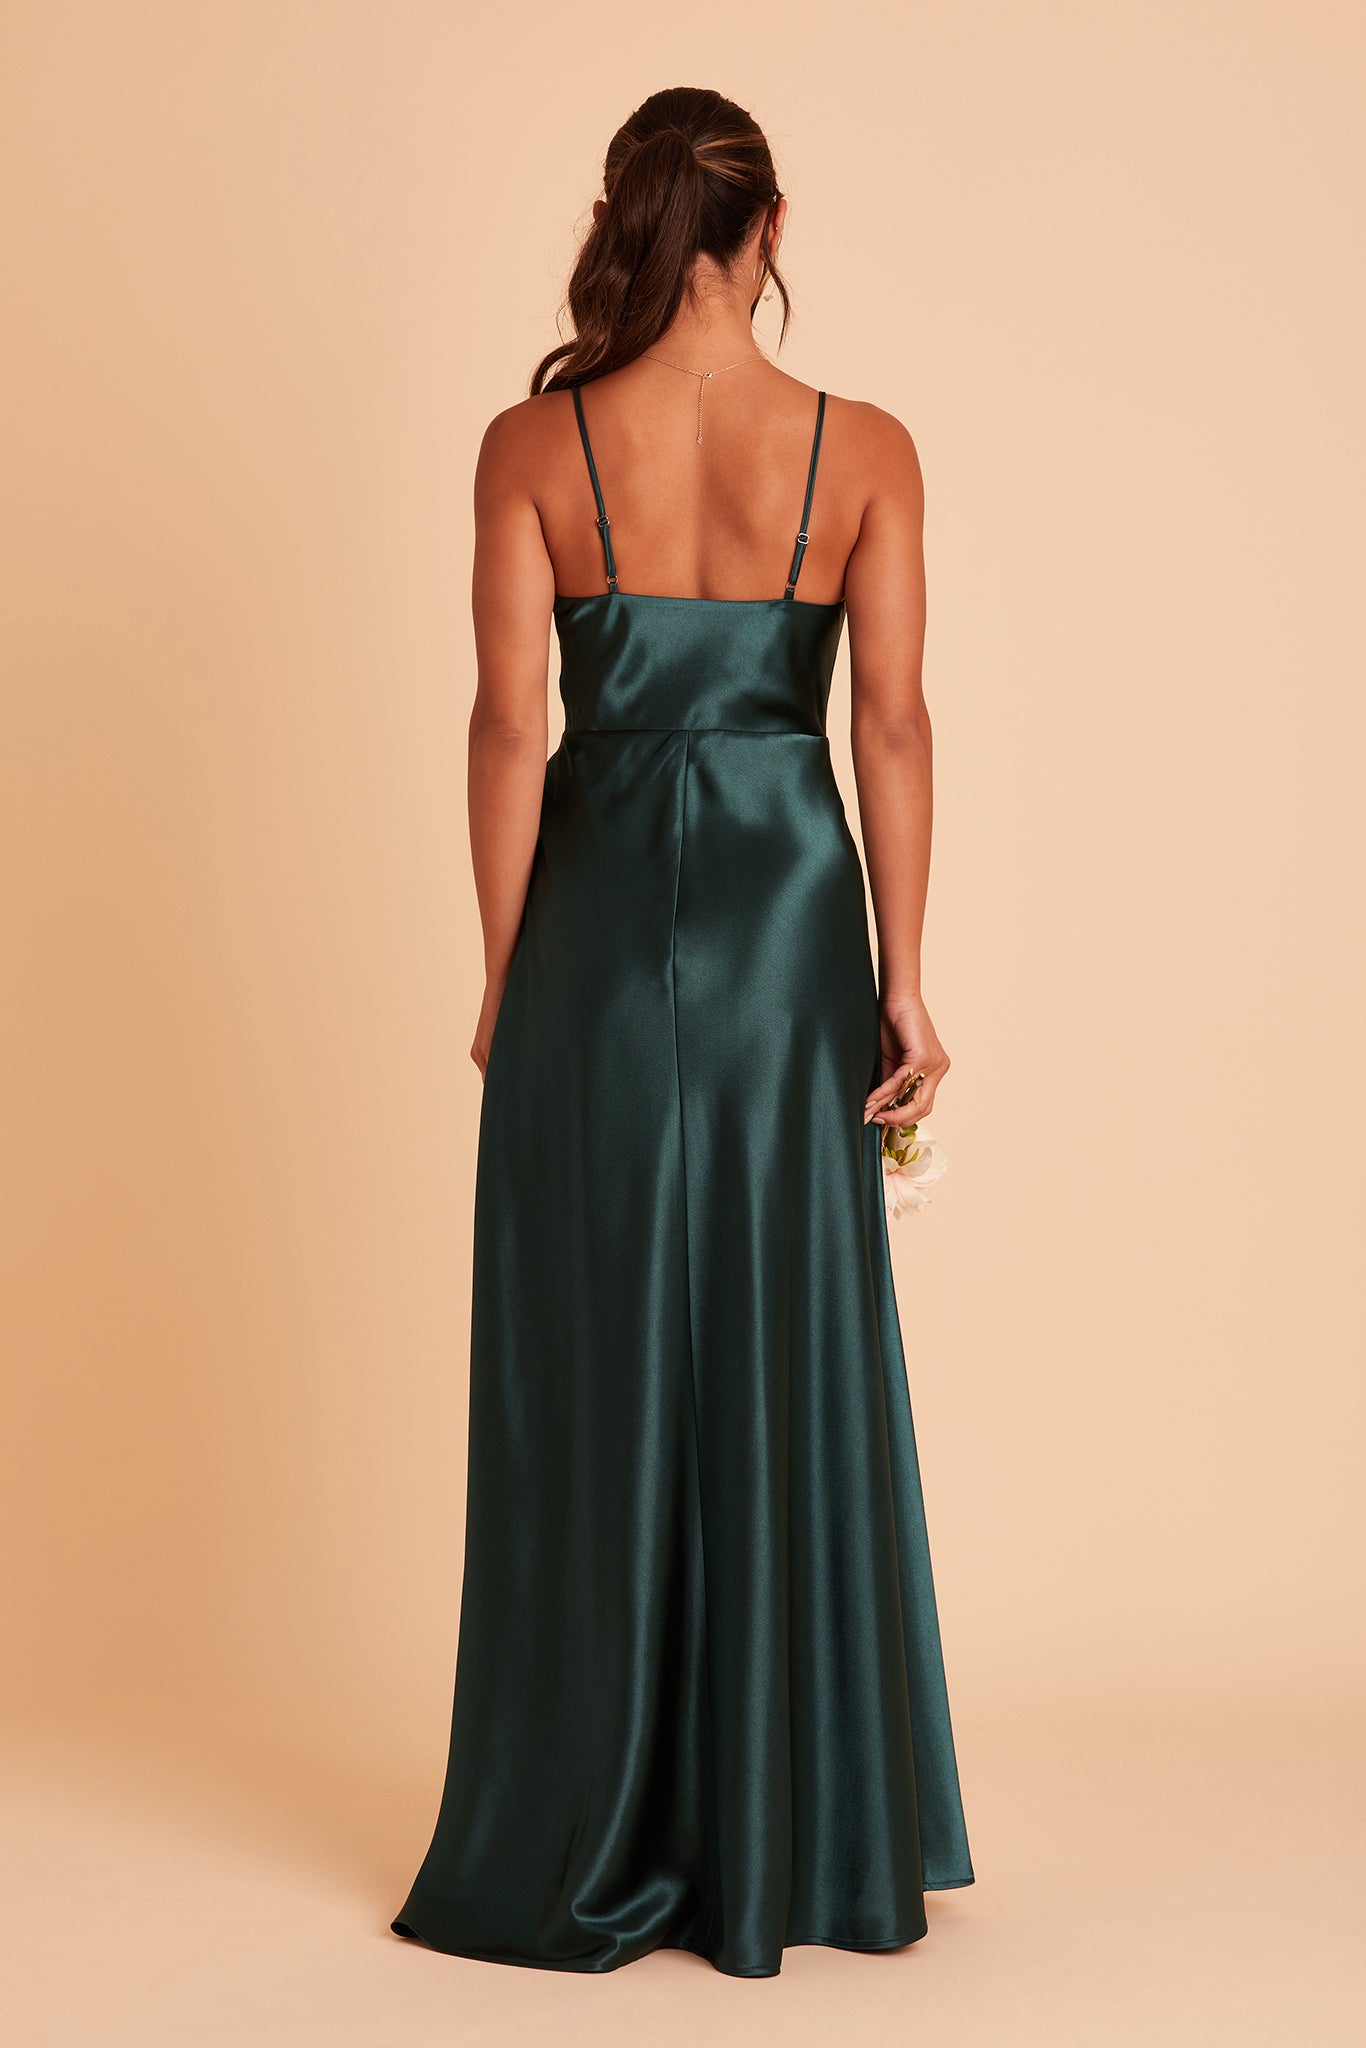 Back view of the Lisa Long Dress in emerald satin shows the back of the dress with adjustable spaghetti straps and a smooth fit in the bodice and waist that attach to a full length skirt.  